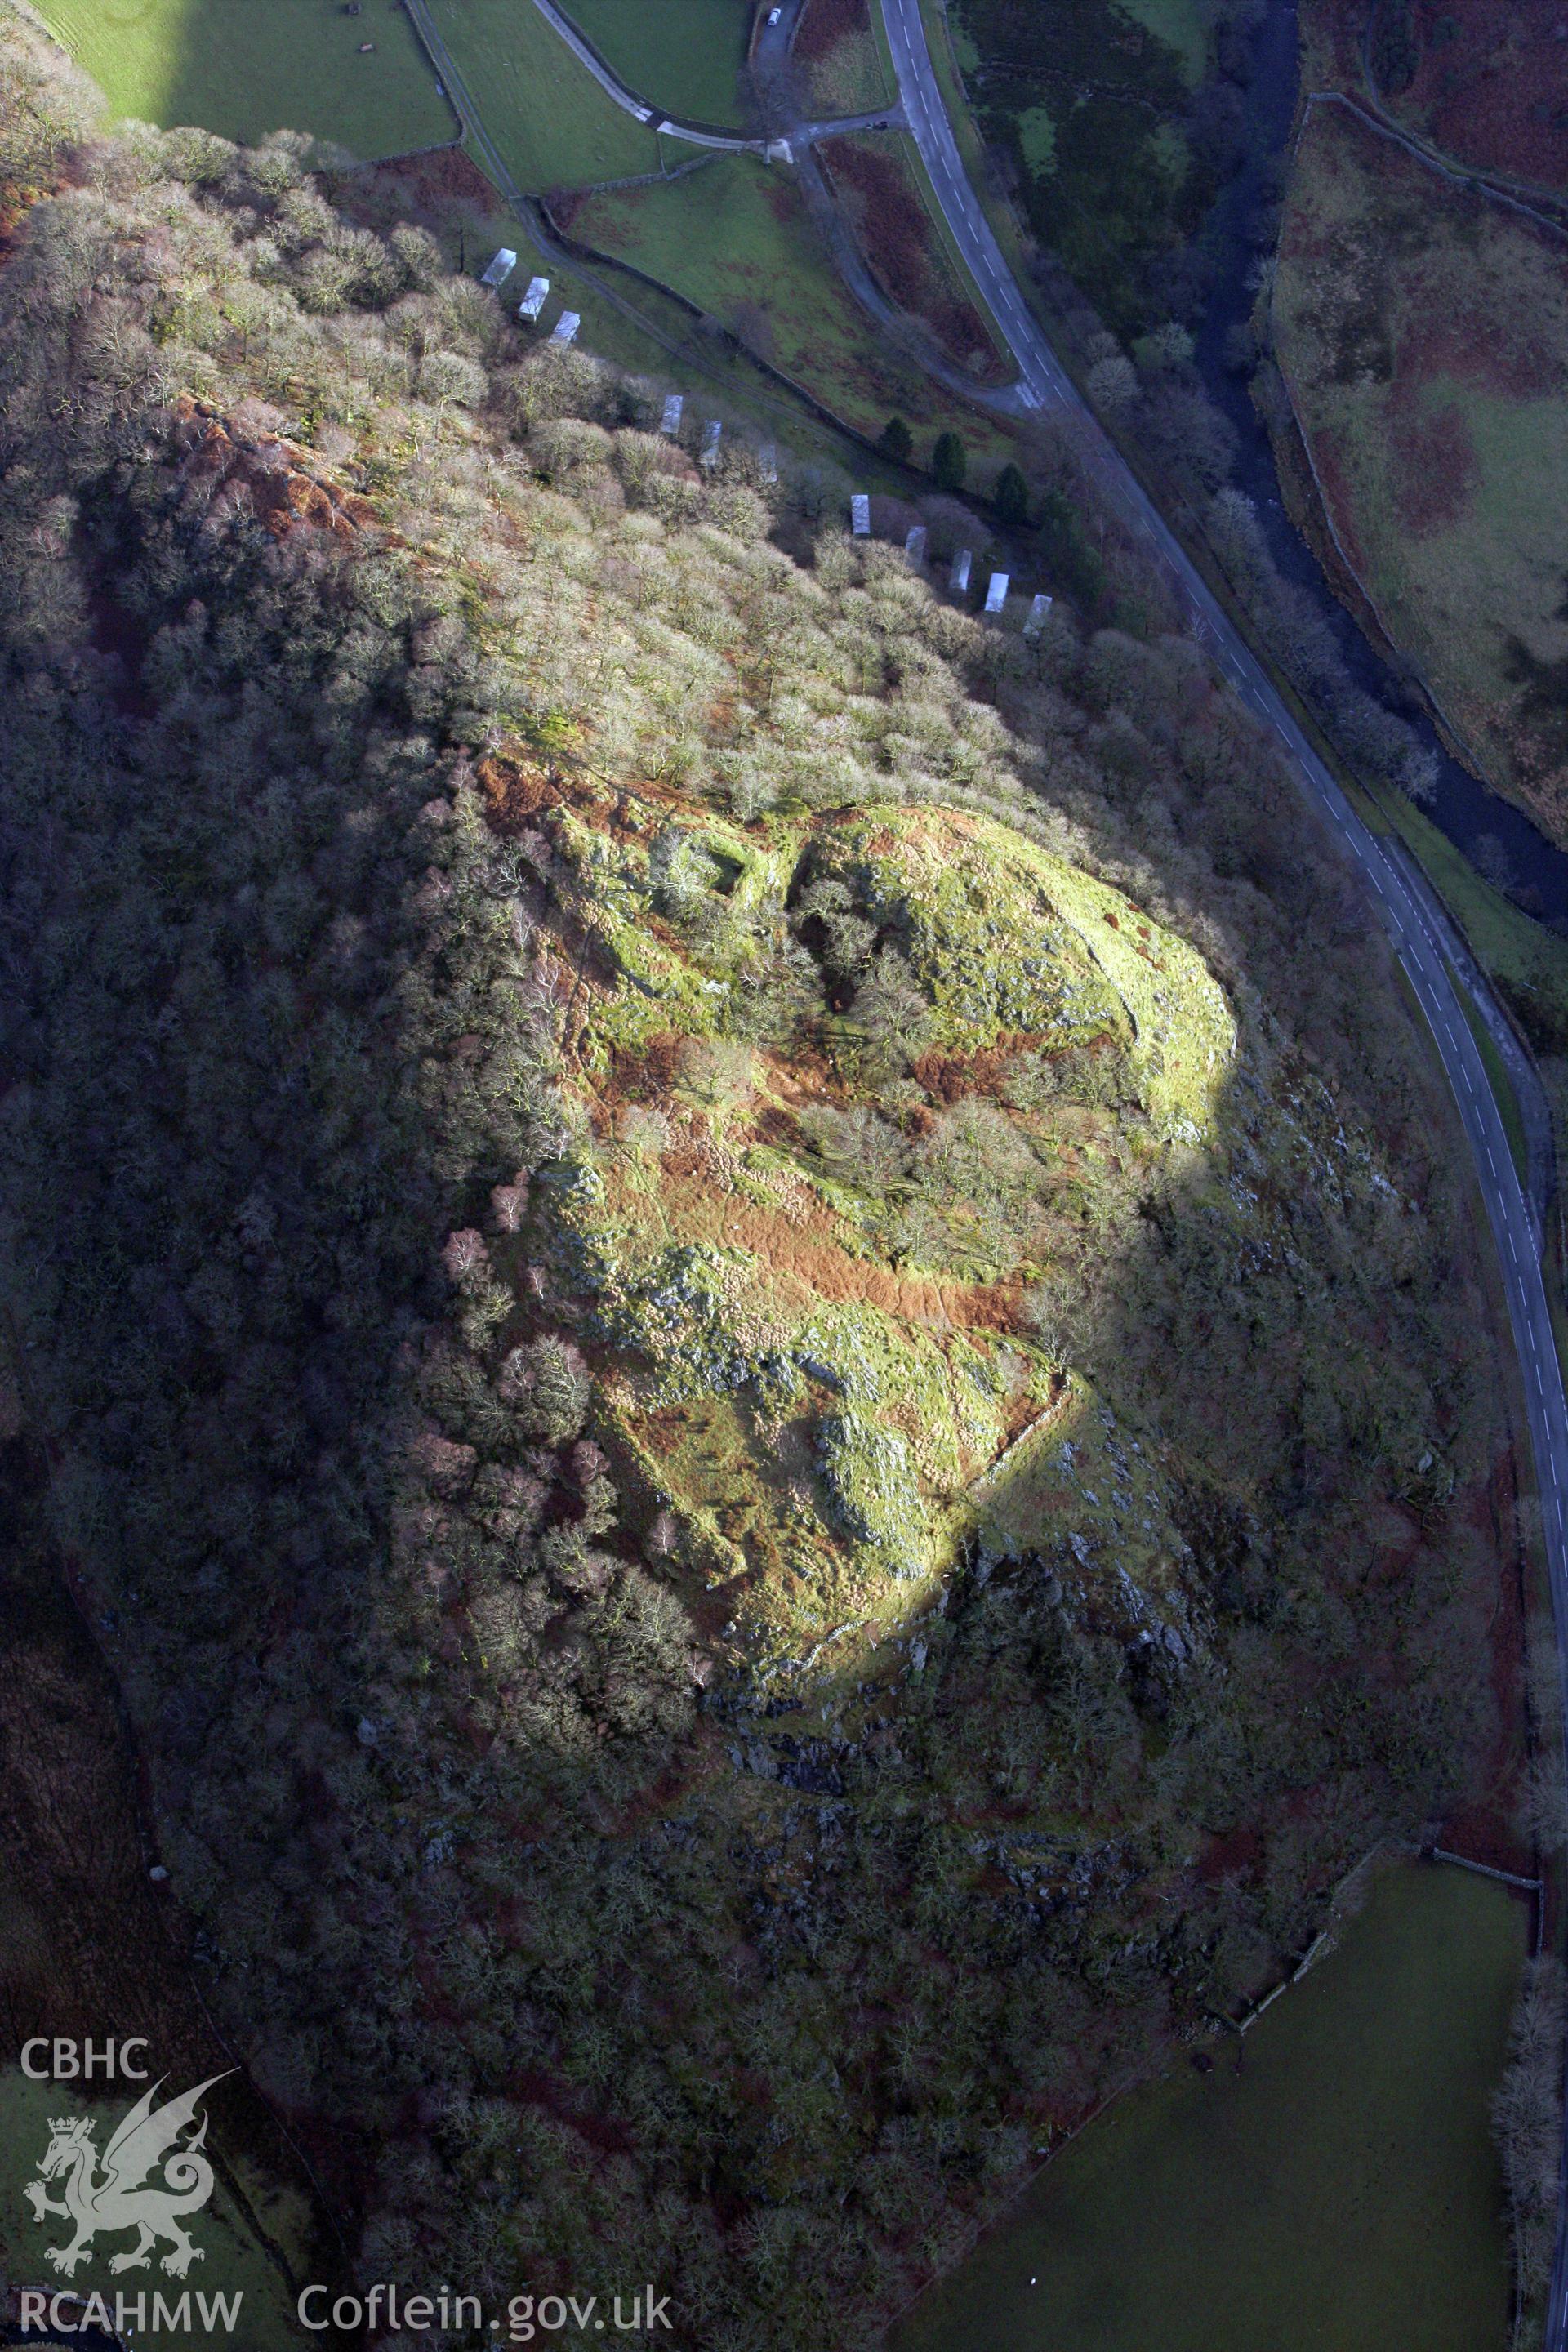 RCAHMW colour oblique photograph of Dinas Emrys castle, with castle illuminated by winter sunlight. Taken by Toby Driver on 13/01/2012.